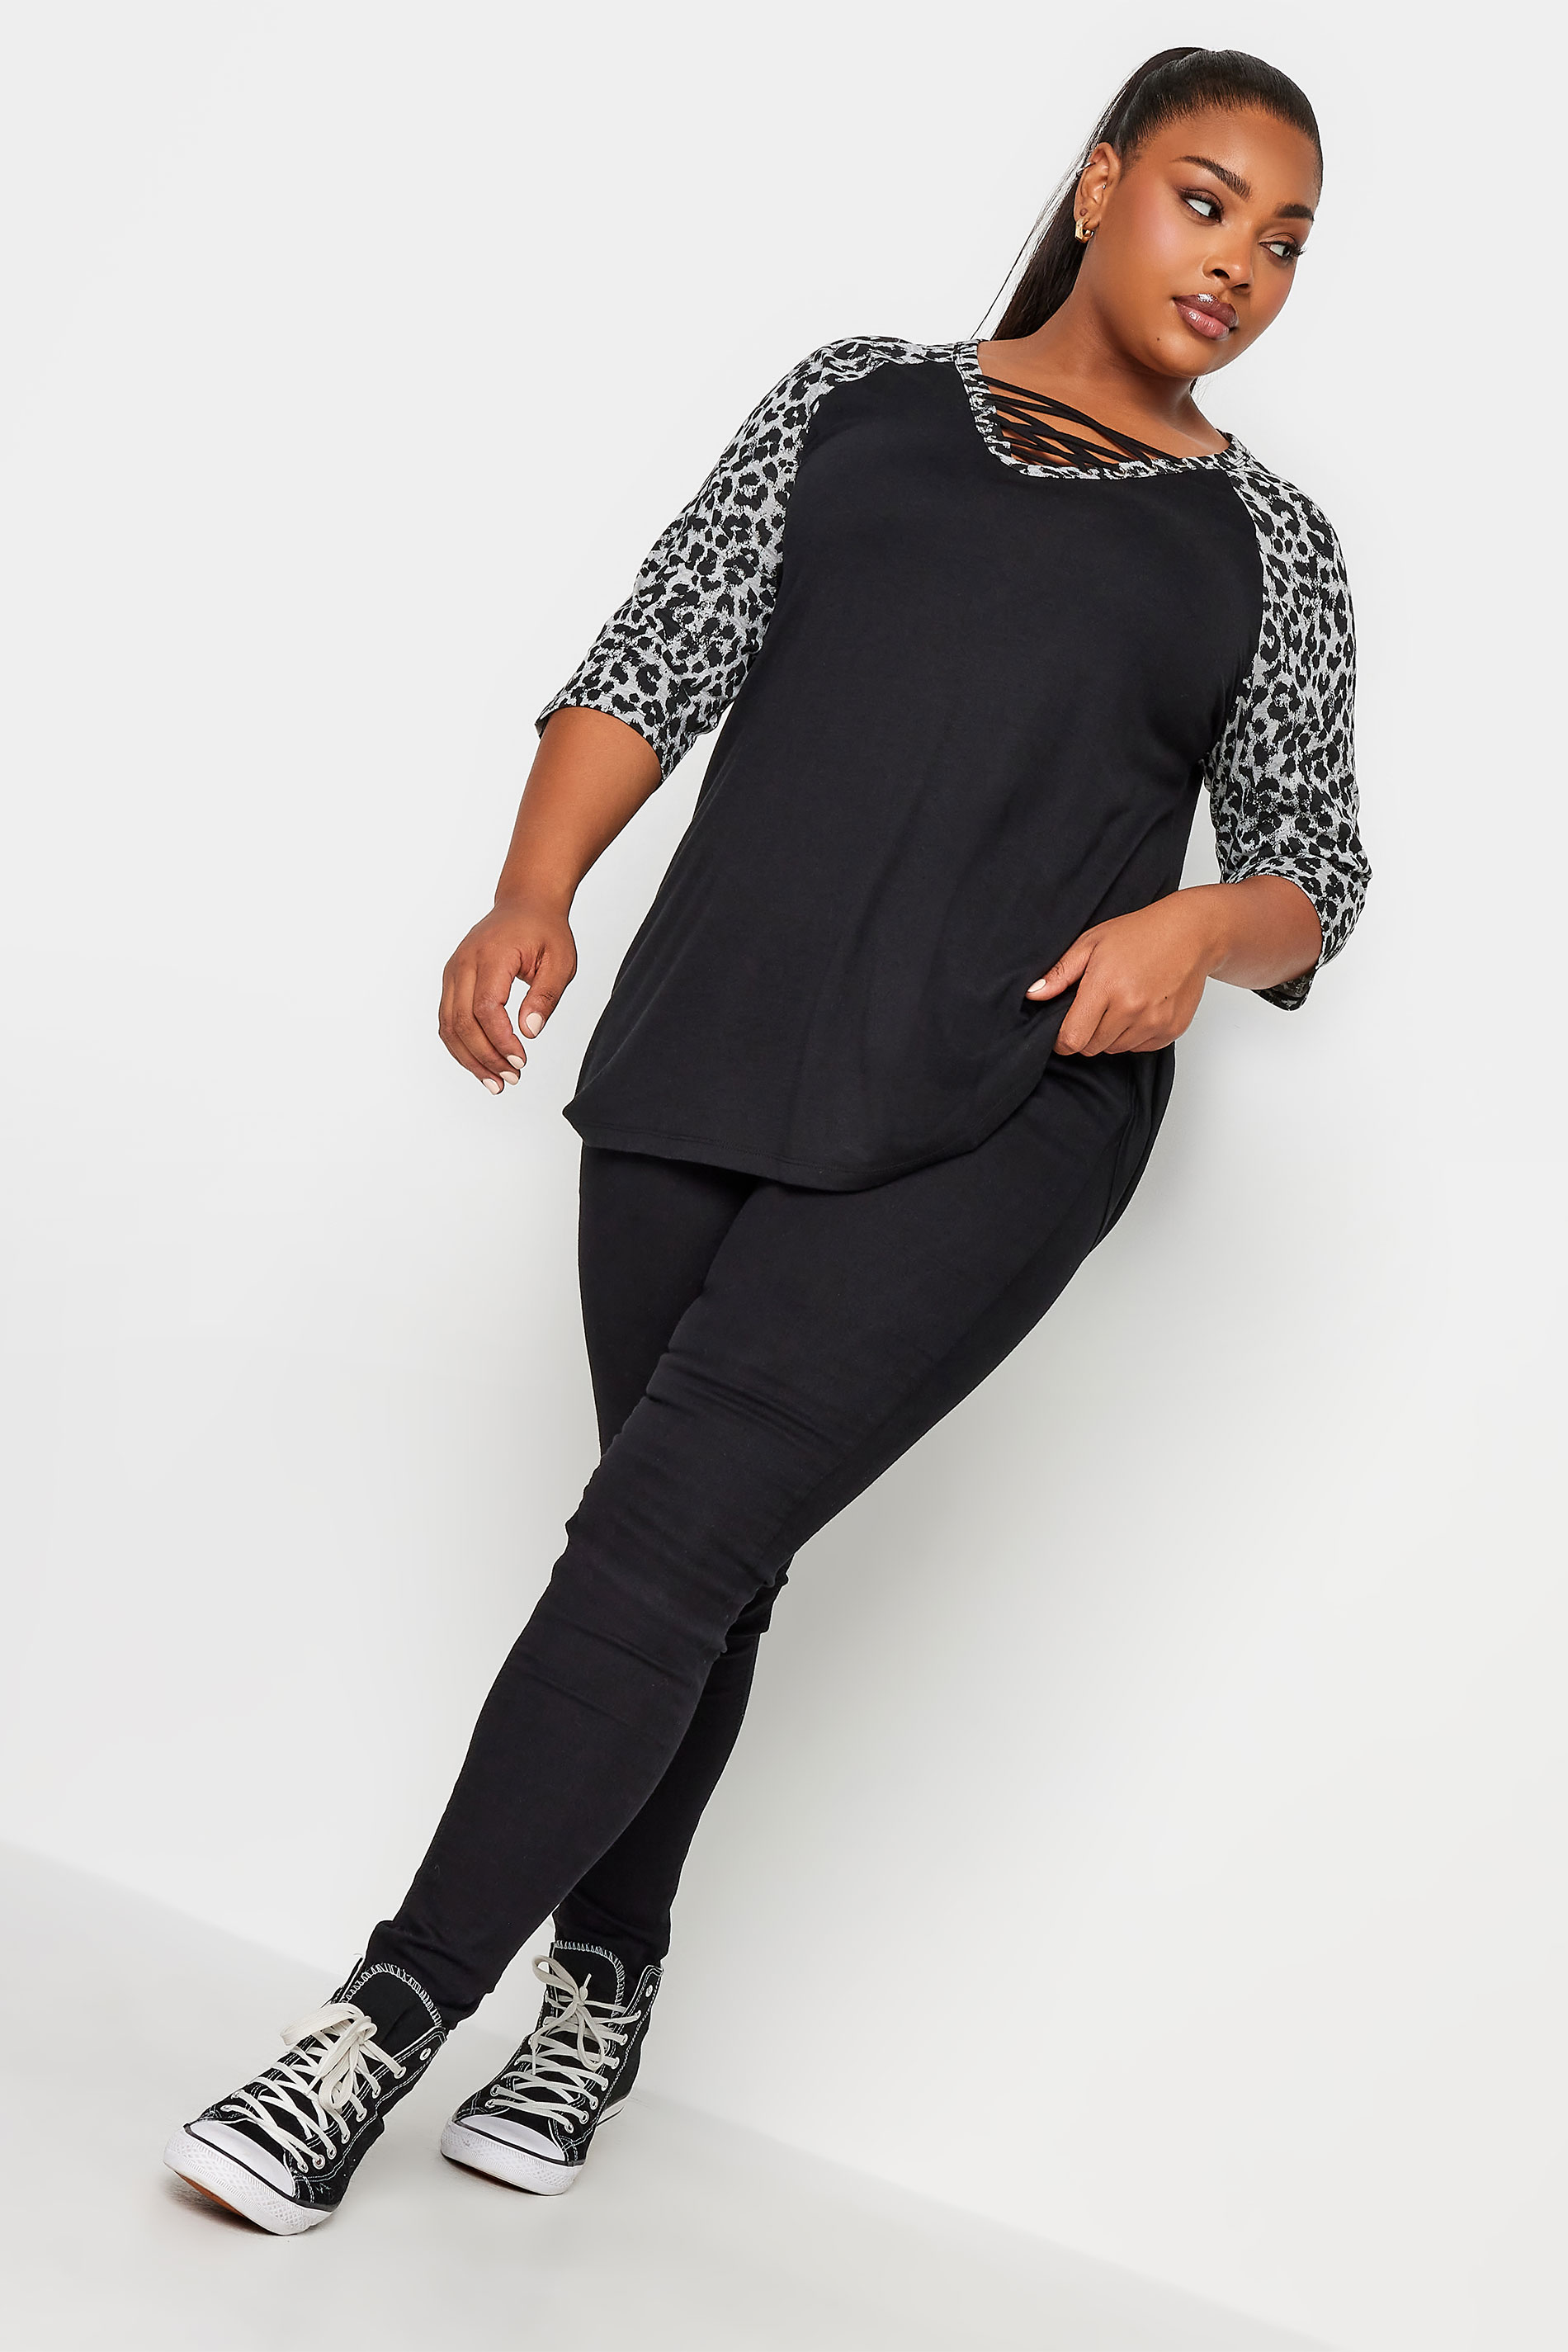 YOURS Plus Size Black Leopard Print Lace Up Eyelet Top | Yours Clothing 2